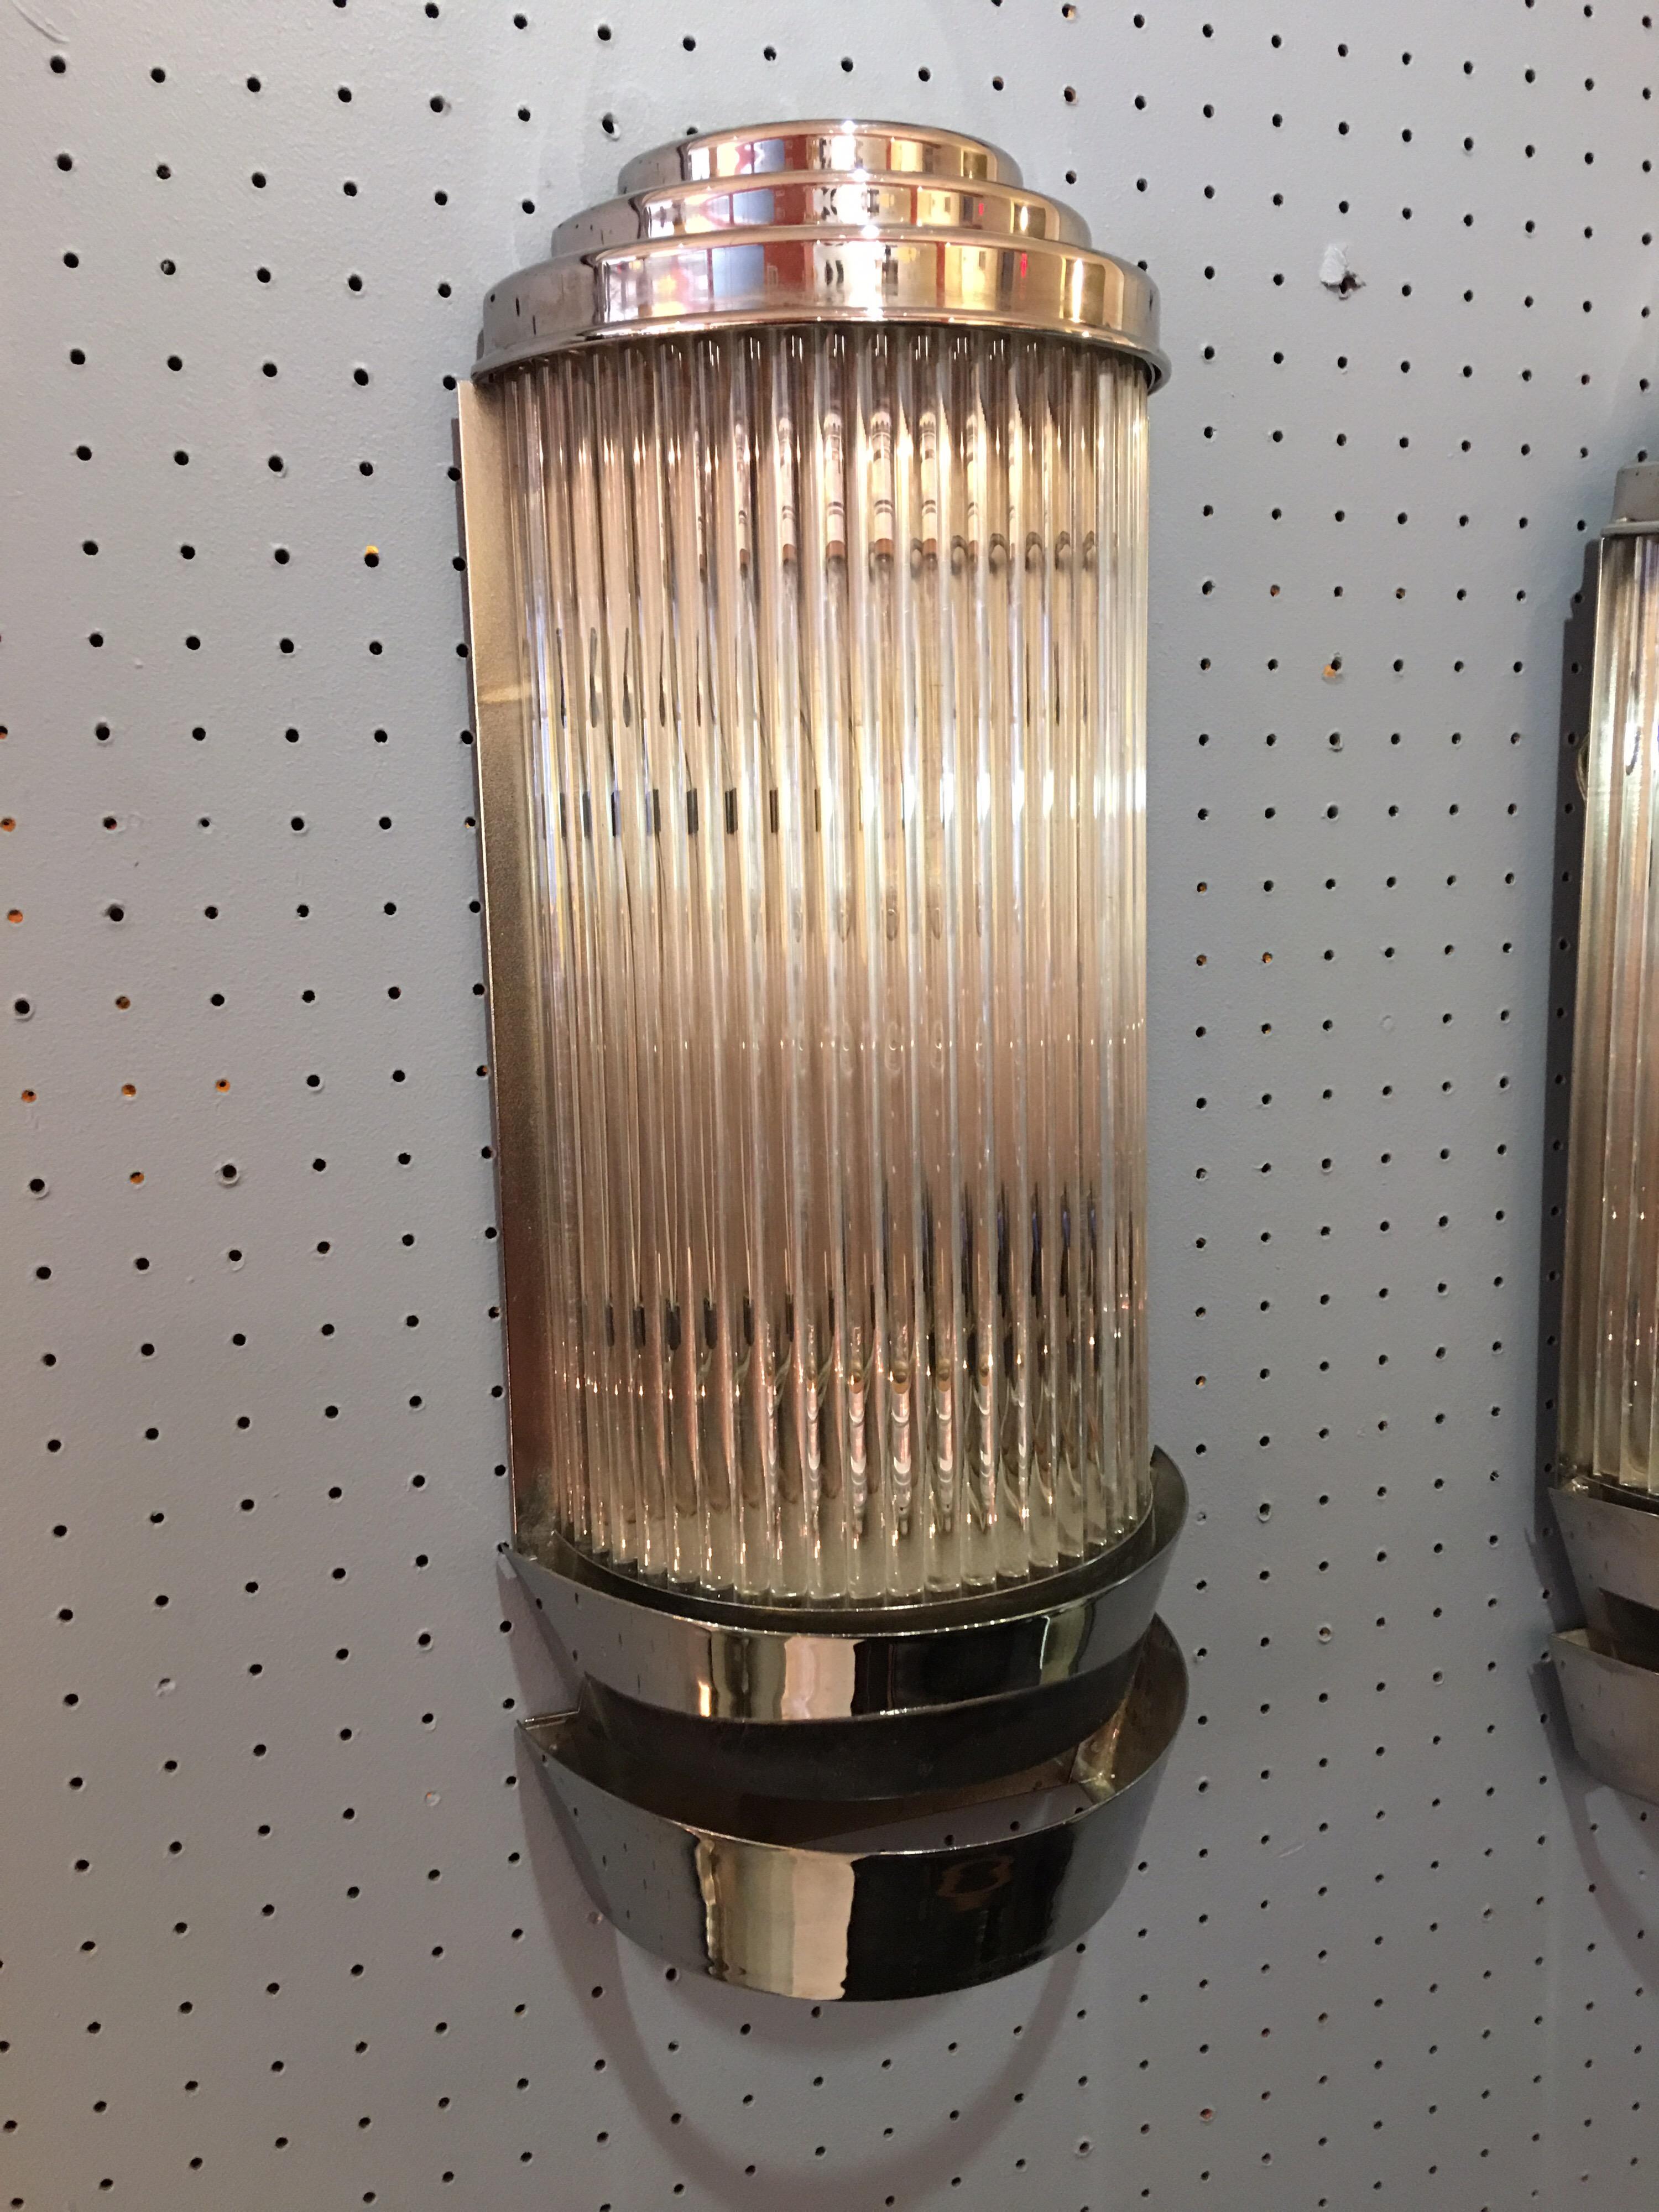 Fully restored deco sconces with glass rods and nickel frames. Additional bottom light can be turned off and on with a pull chain. Great scale!